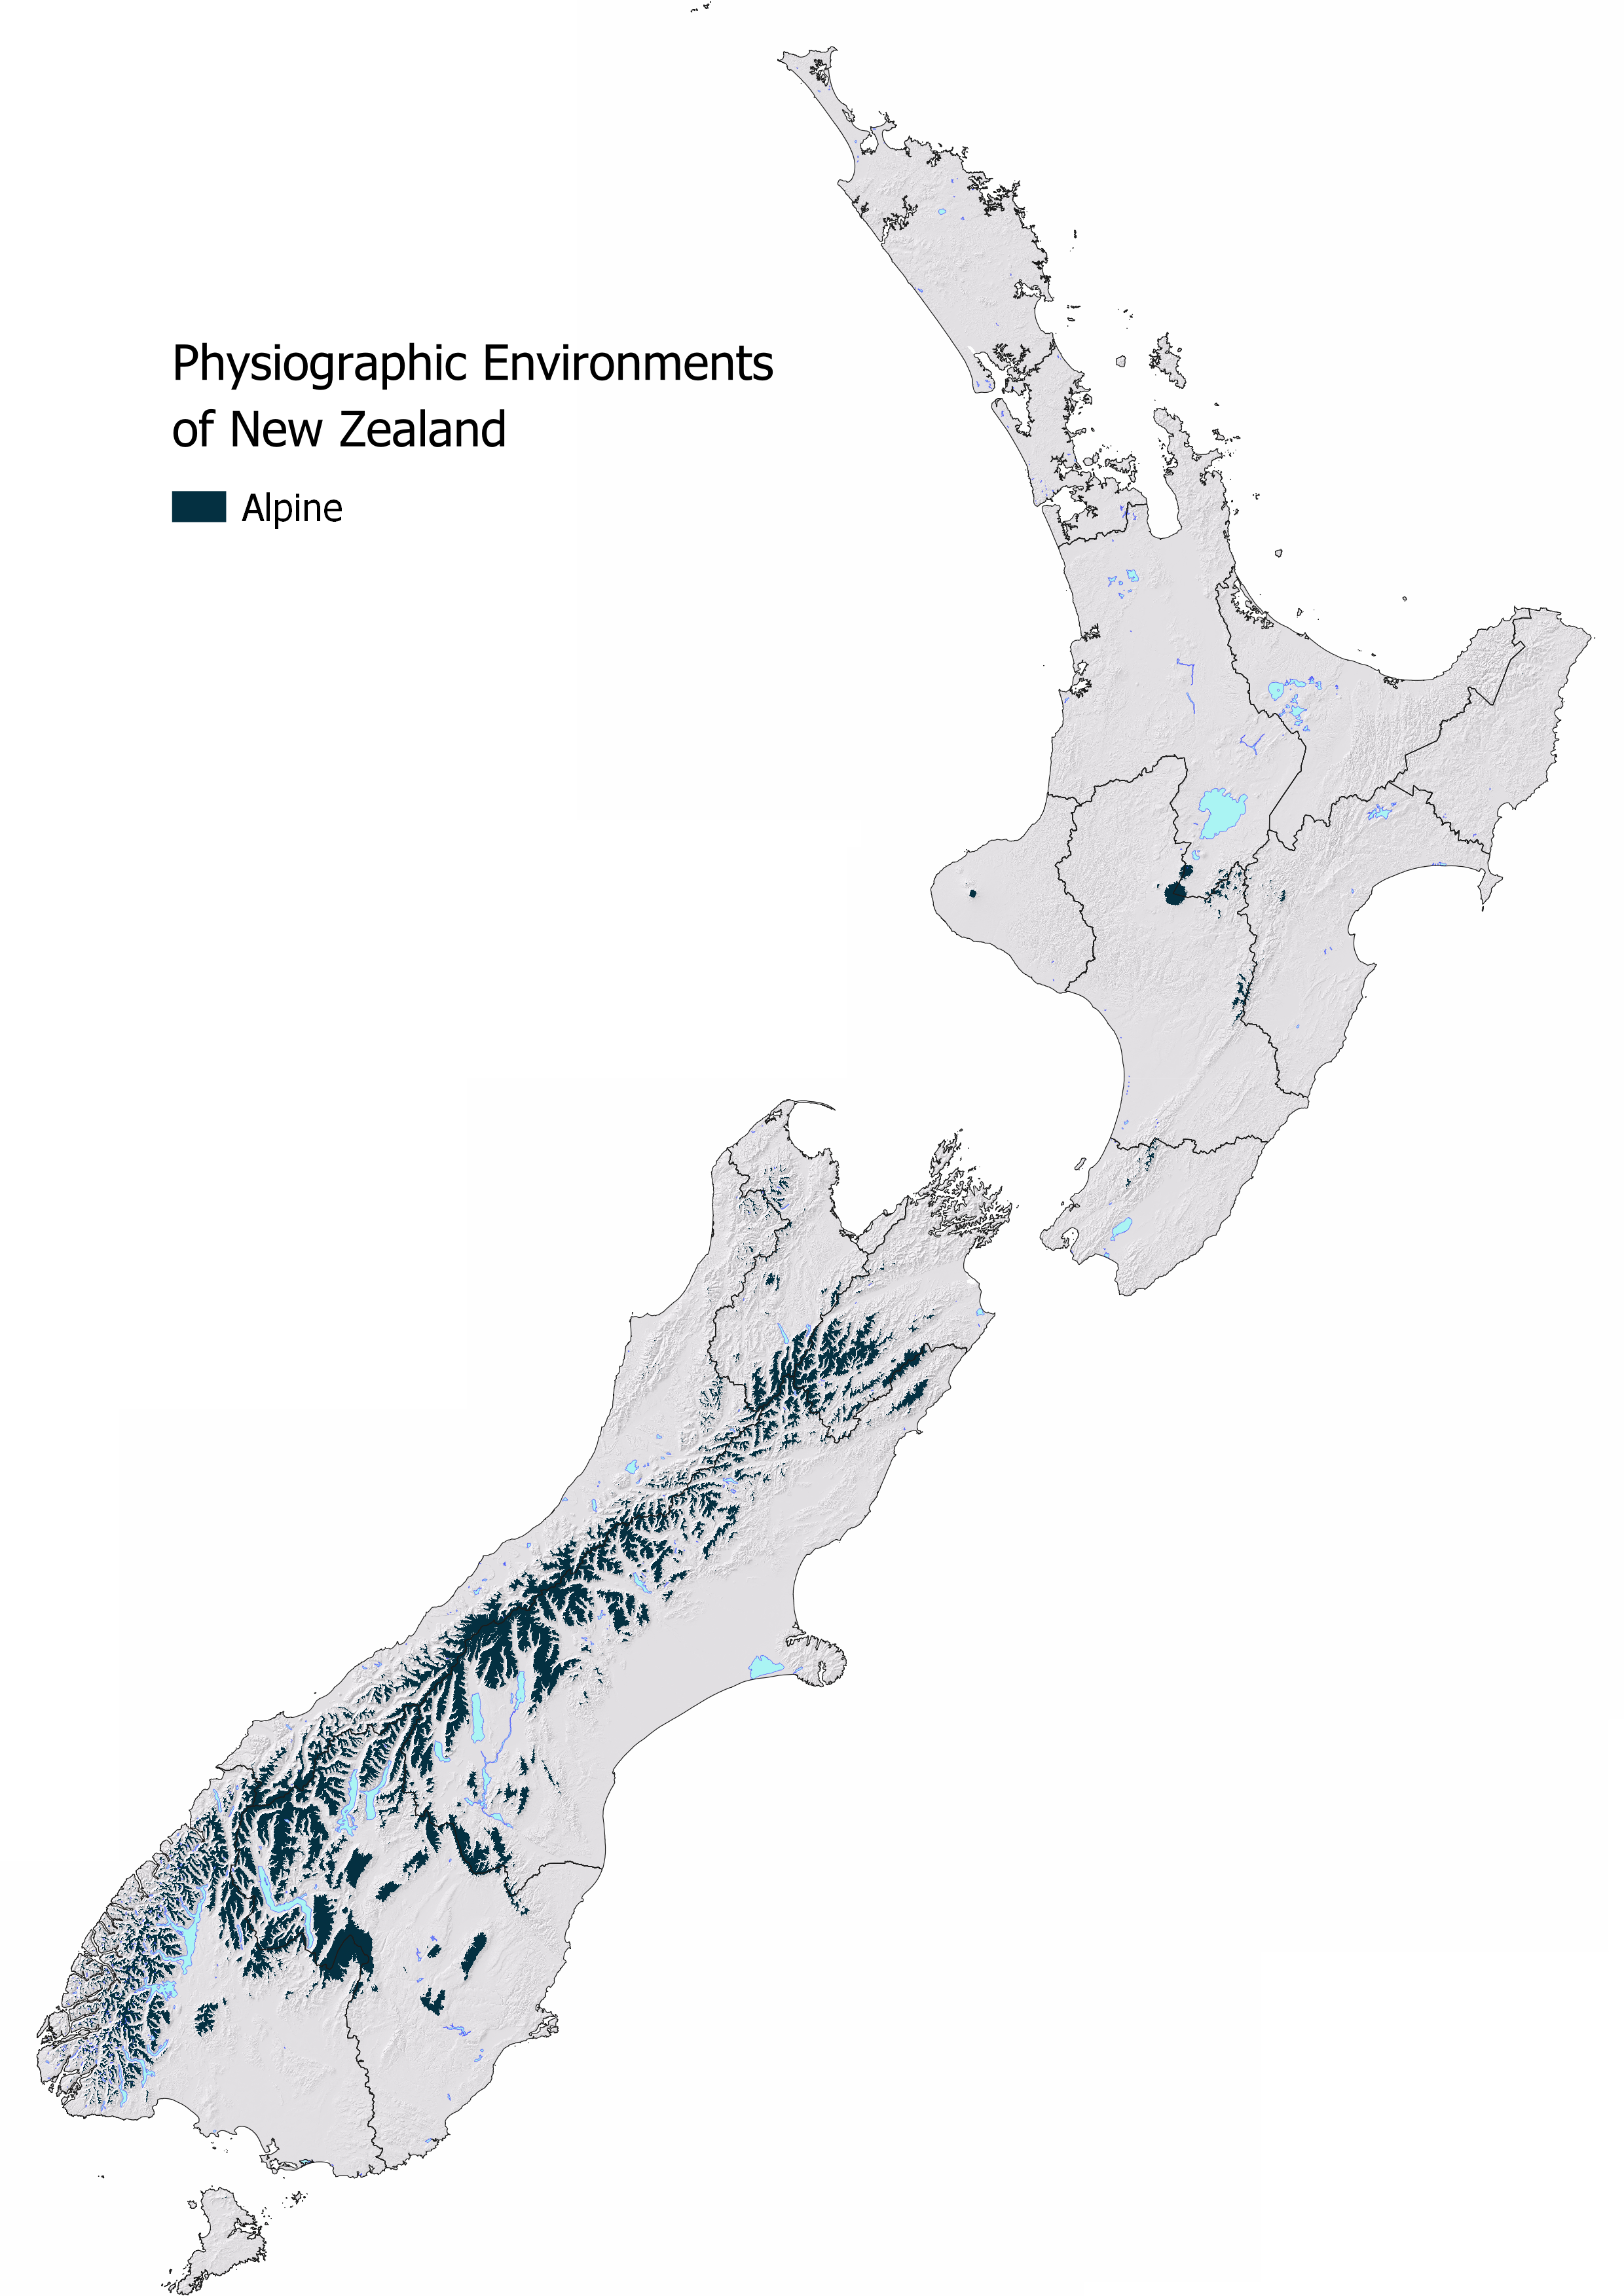 slope map of new zealand with the parts classified as alpine showing